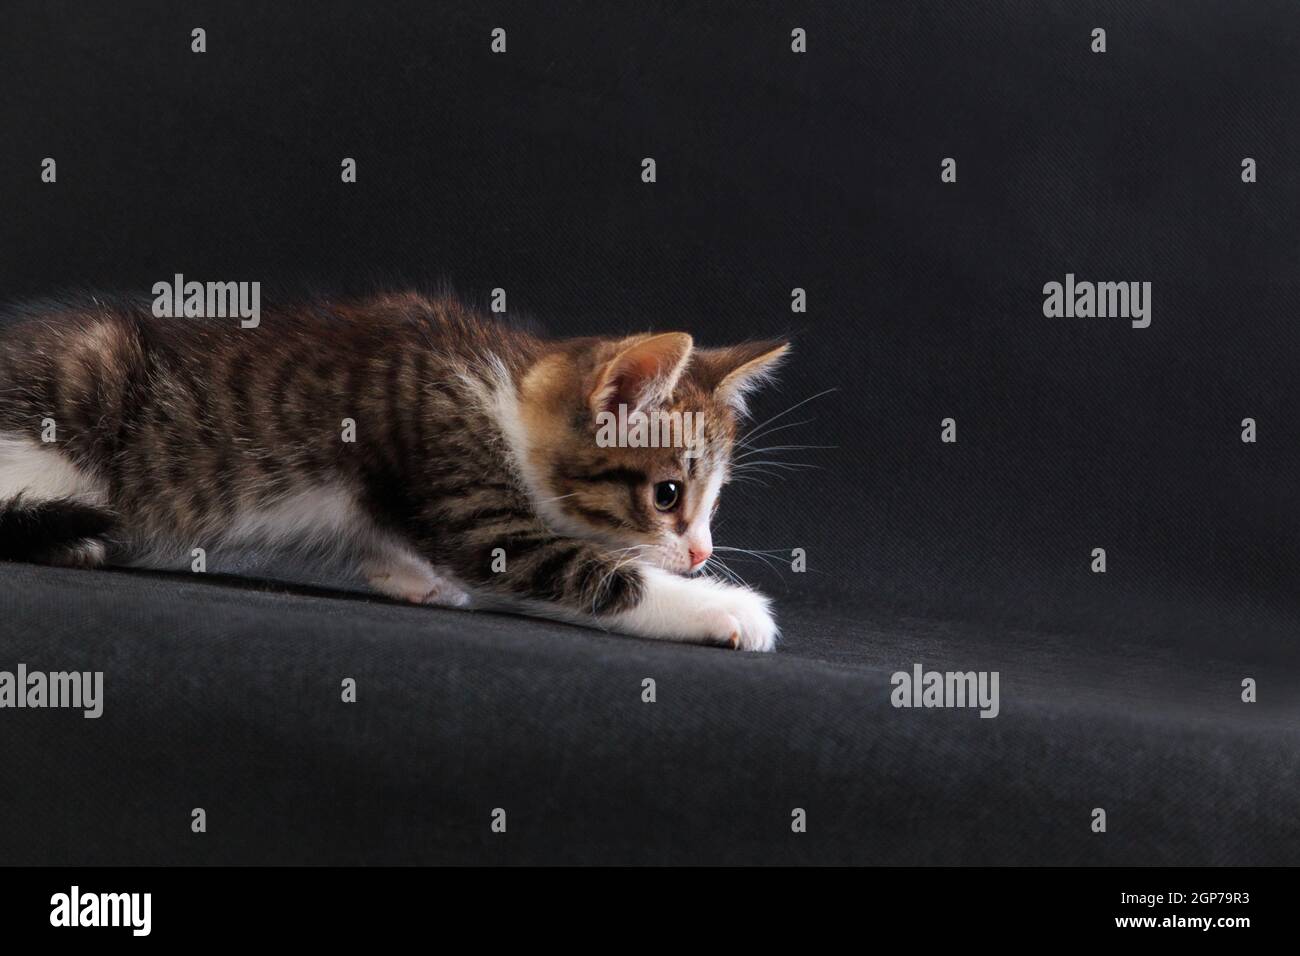 Striped grey white-breasted kitten decides to play and hunt and is prowling on black background in studio indoors Stock Photo